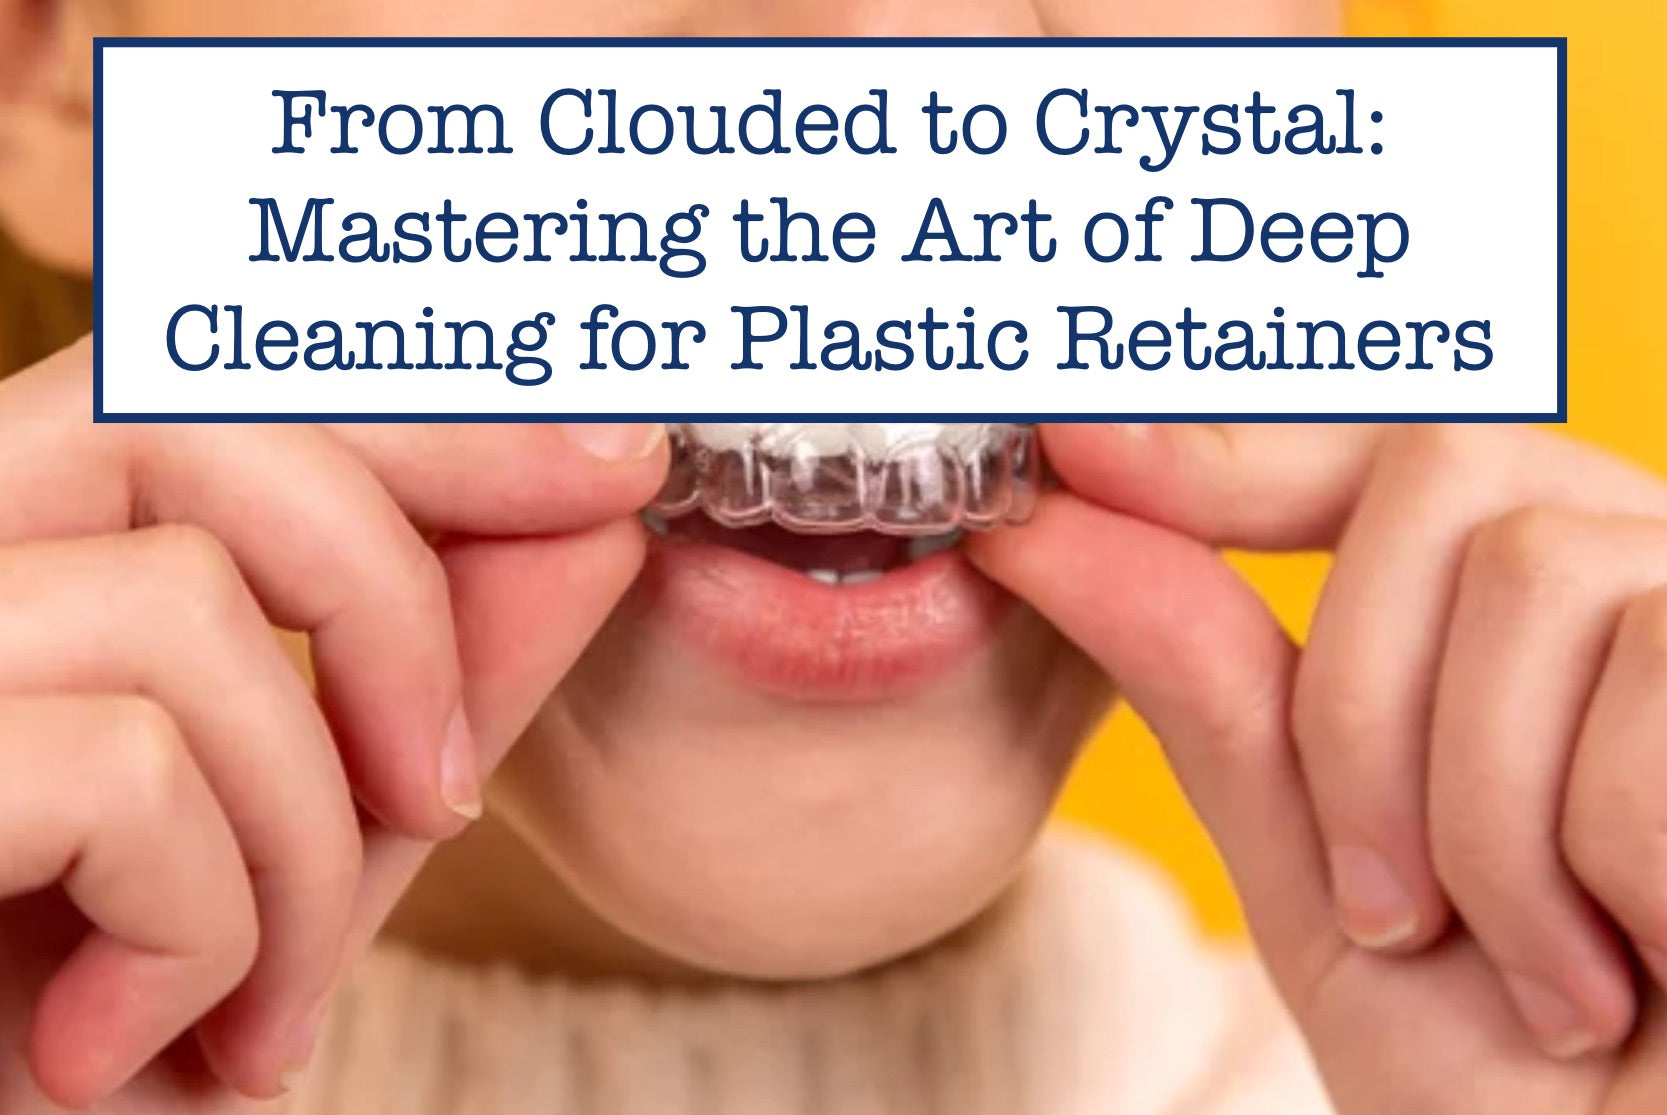 From Clouded to Crystal: Mastering the Art of Deep Cleaning for Plastic Retainers